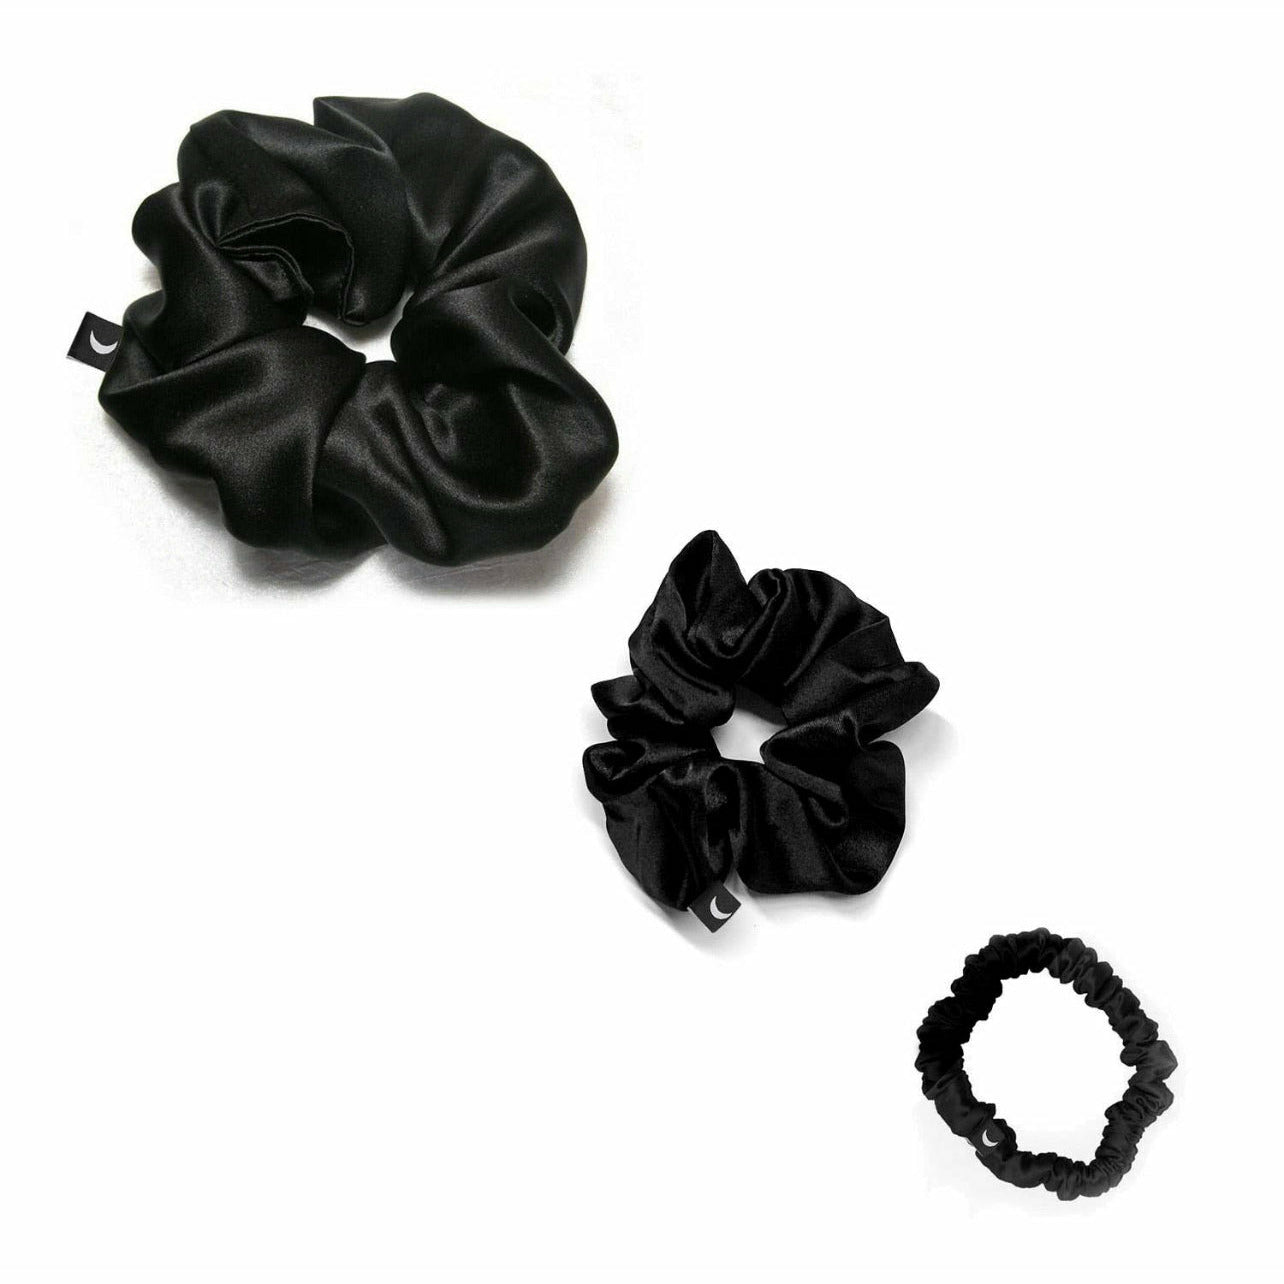 Silk Scrunchie Trio - The Hive by Chris Jesselle